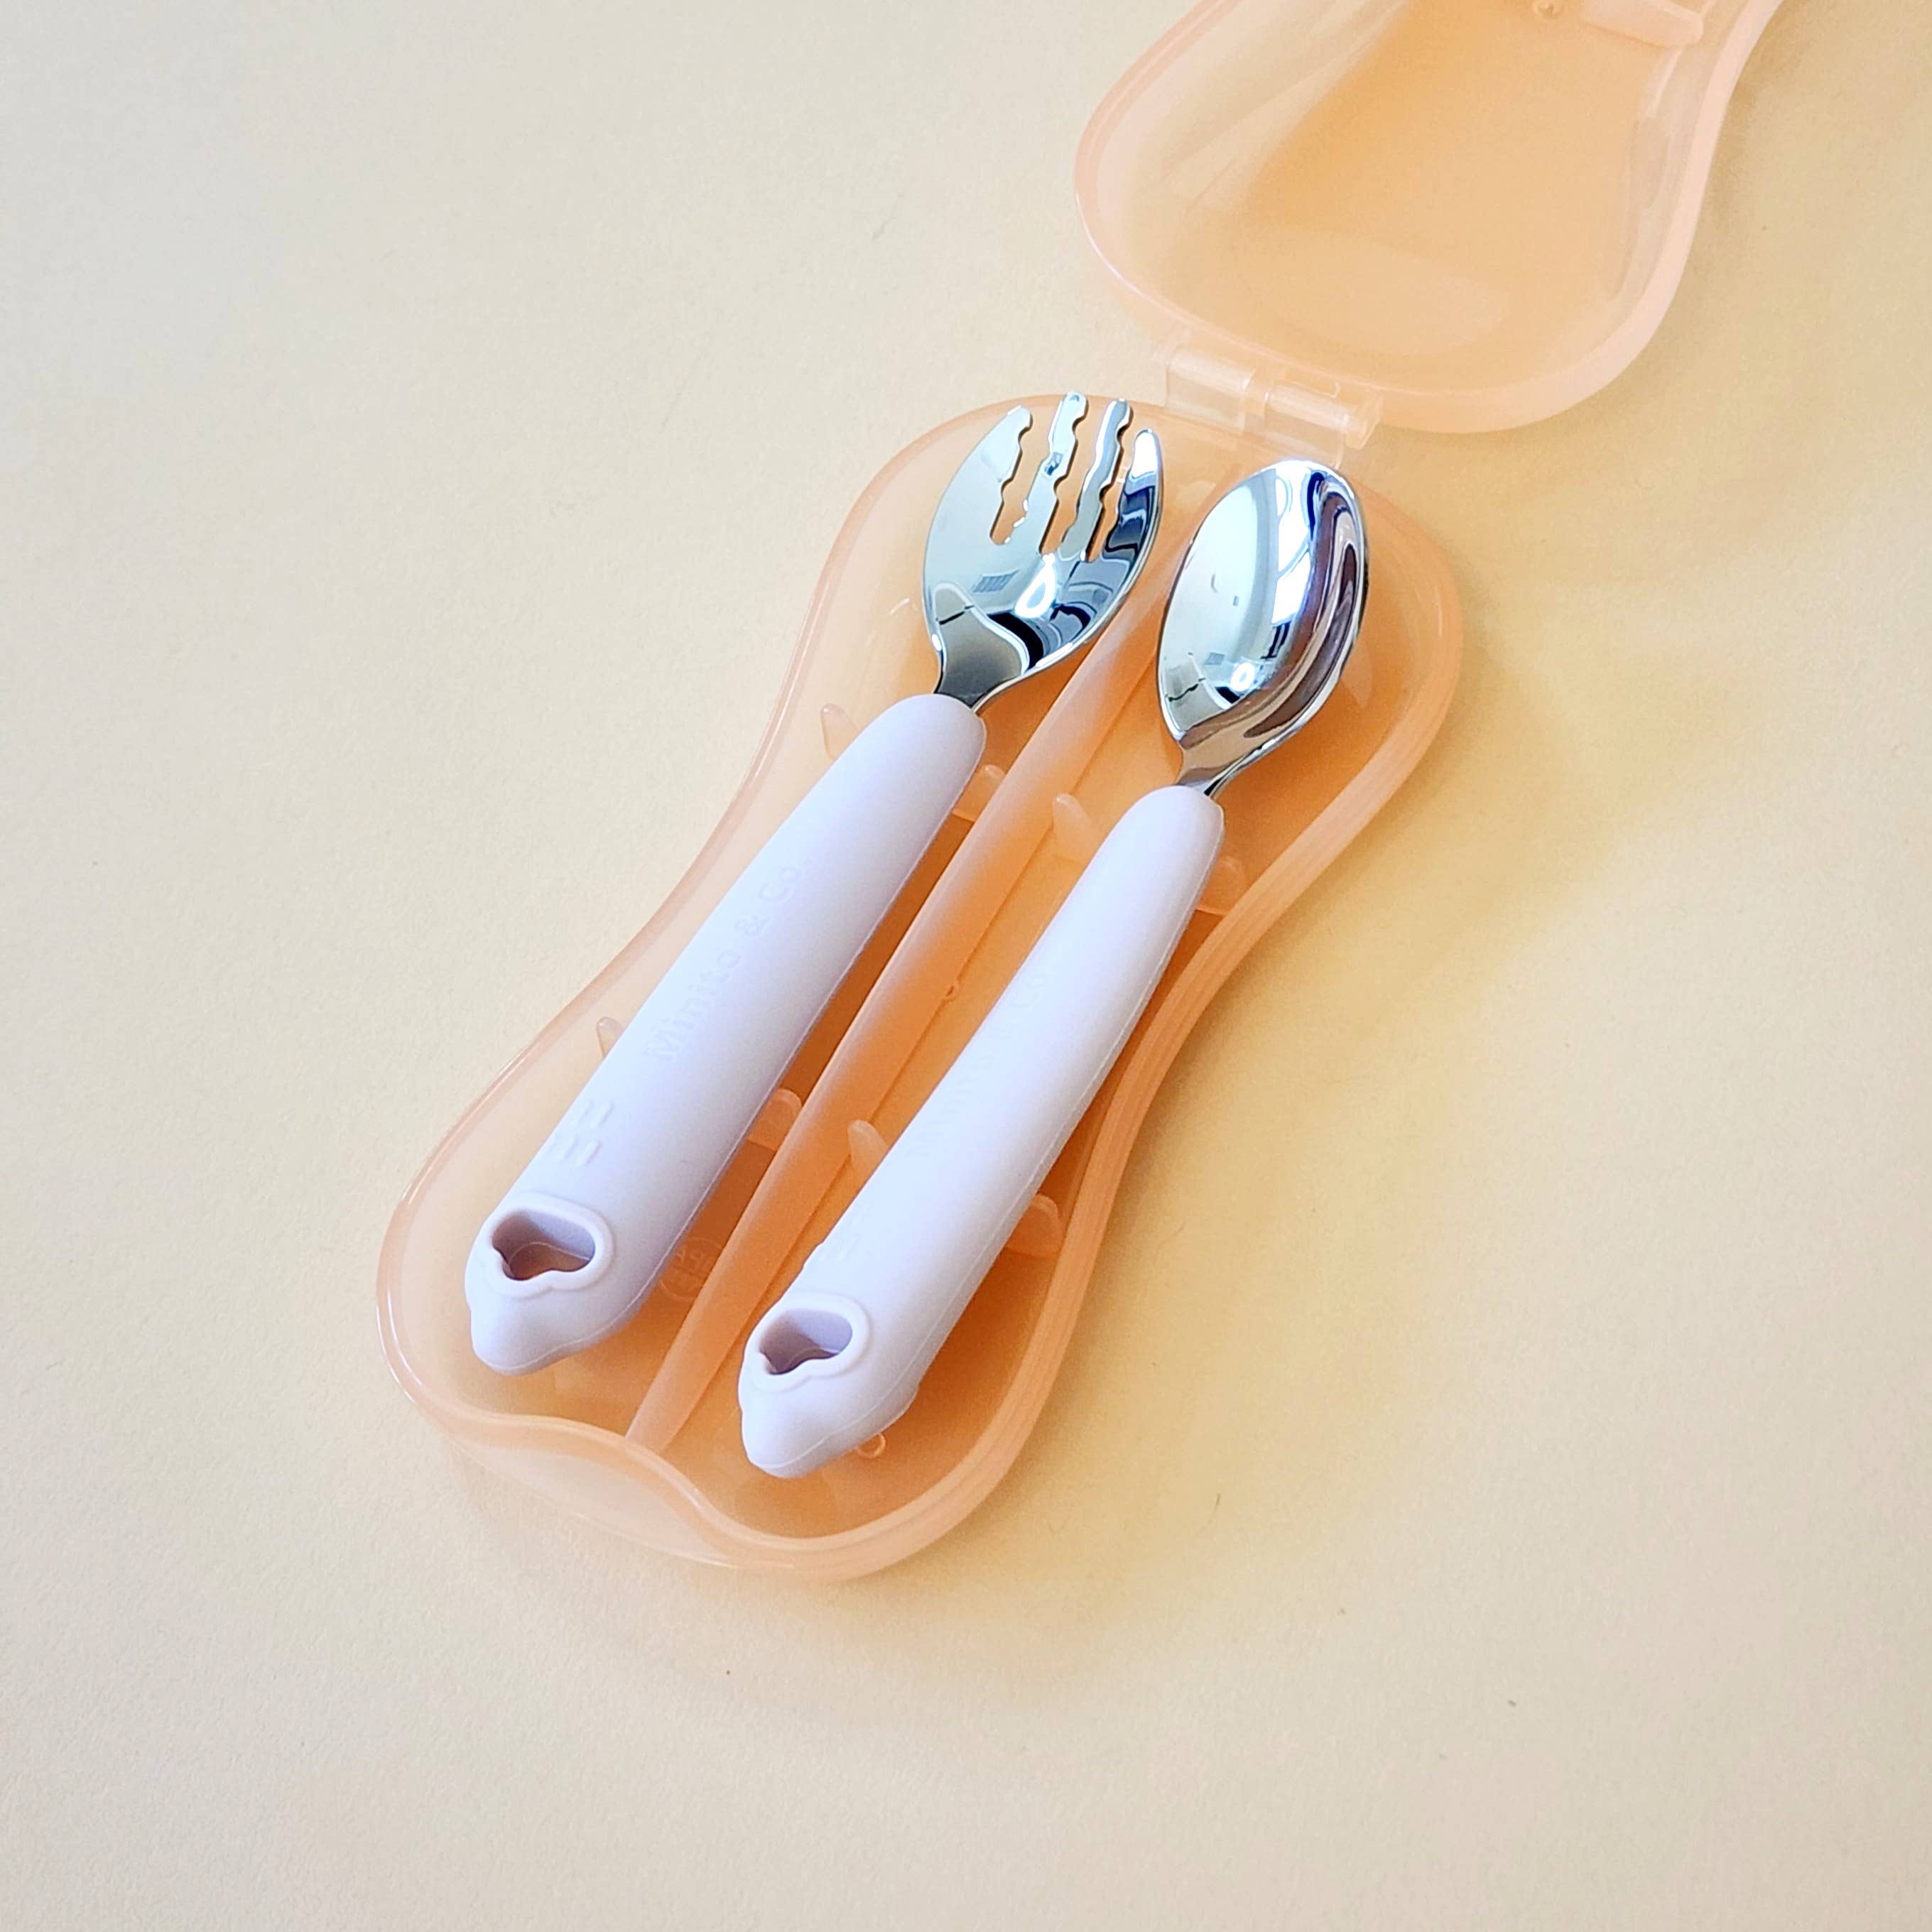 LILAC Silicone & Stainless Steel kids Utensils with Case